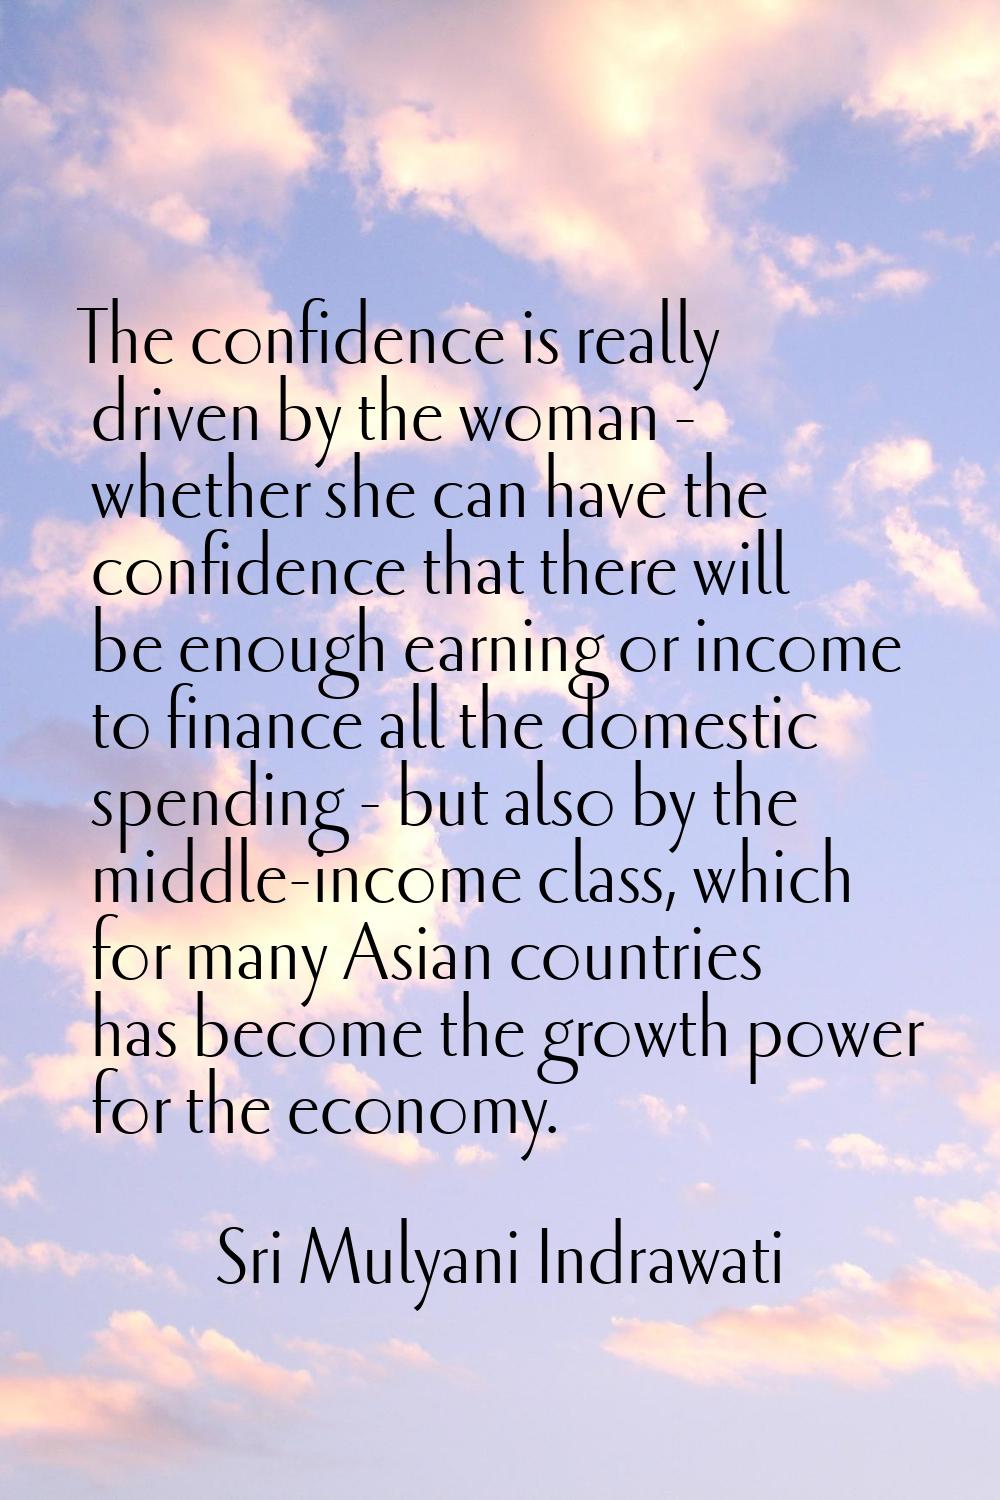 The confidence is really driven by the woman - whether she can have the confidence that there will 